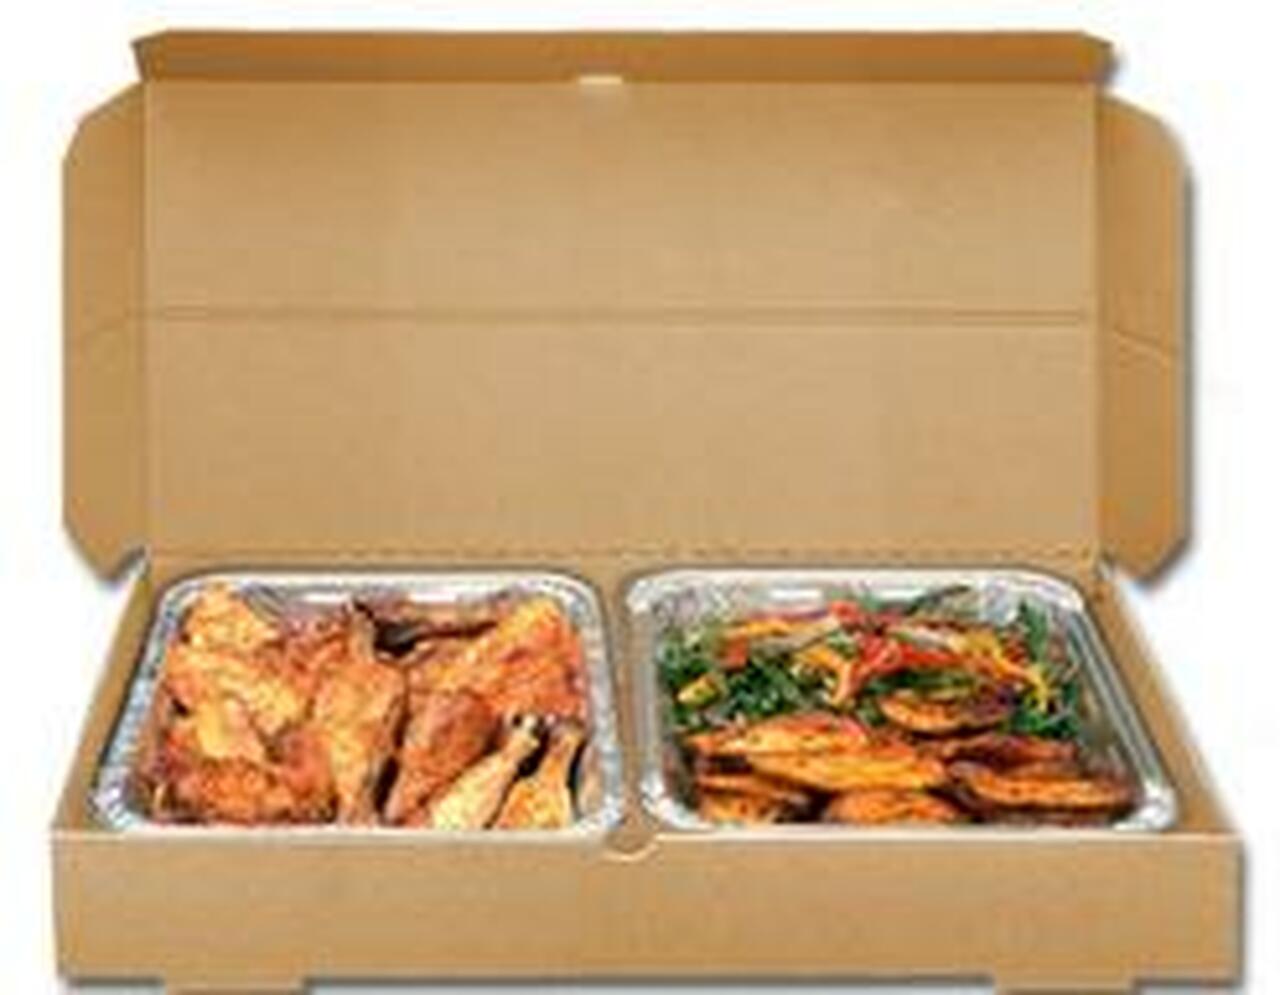 CATERING BOXES